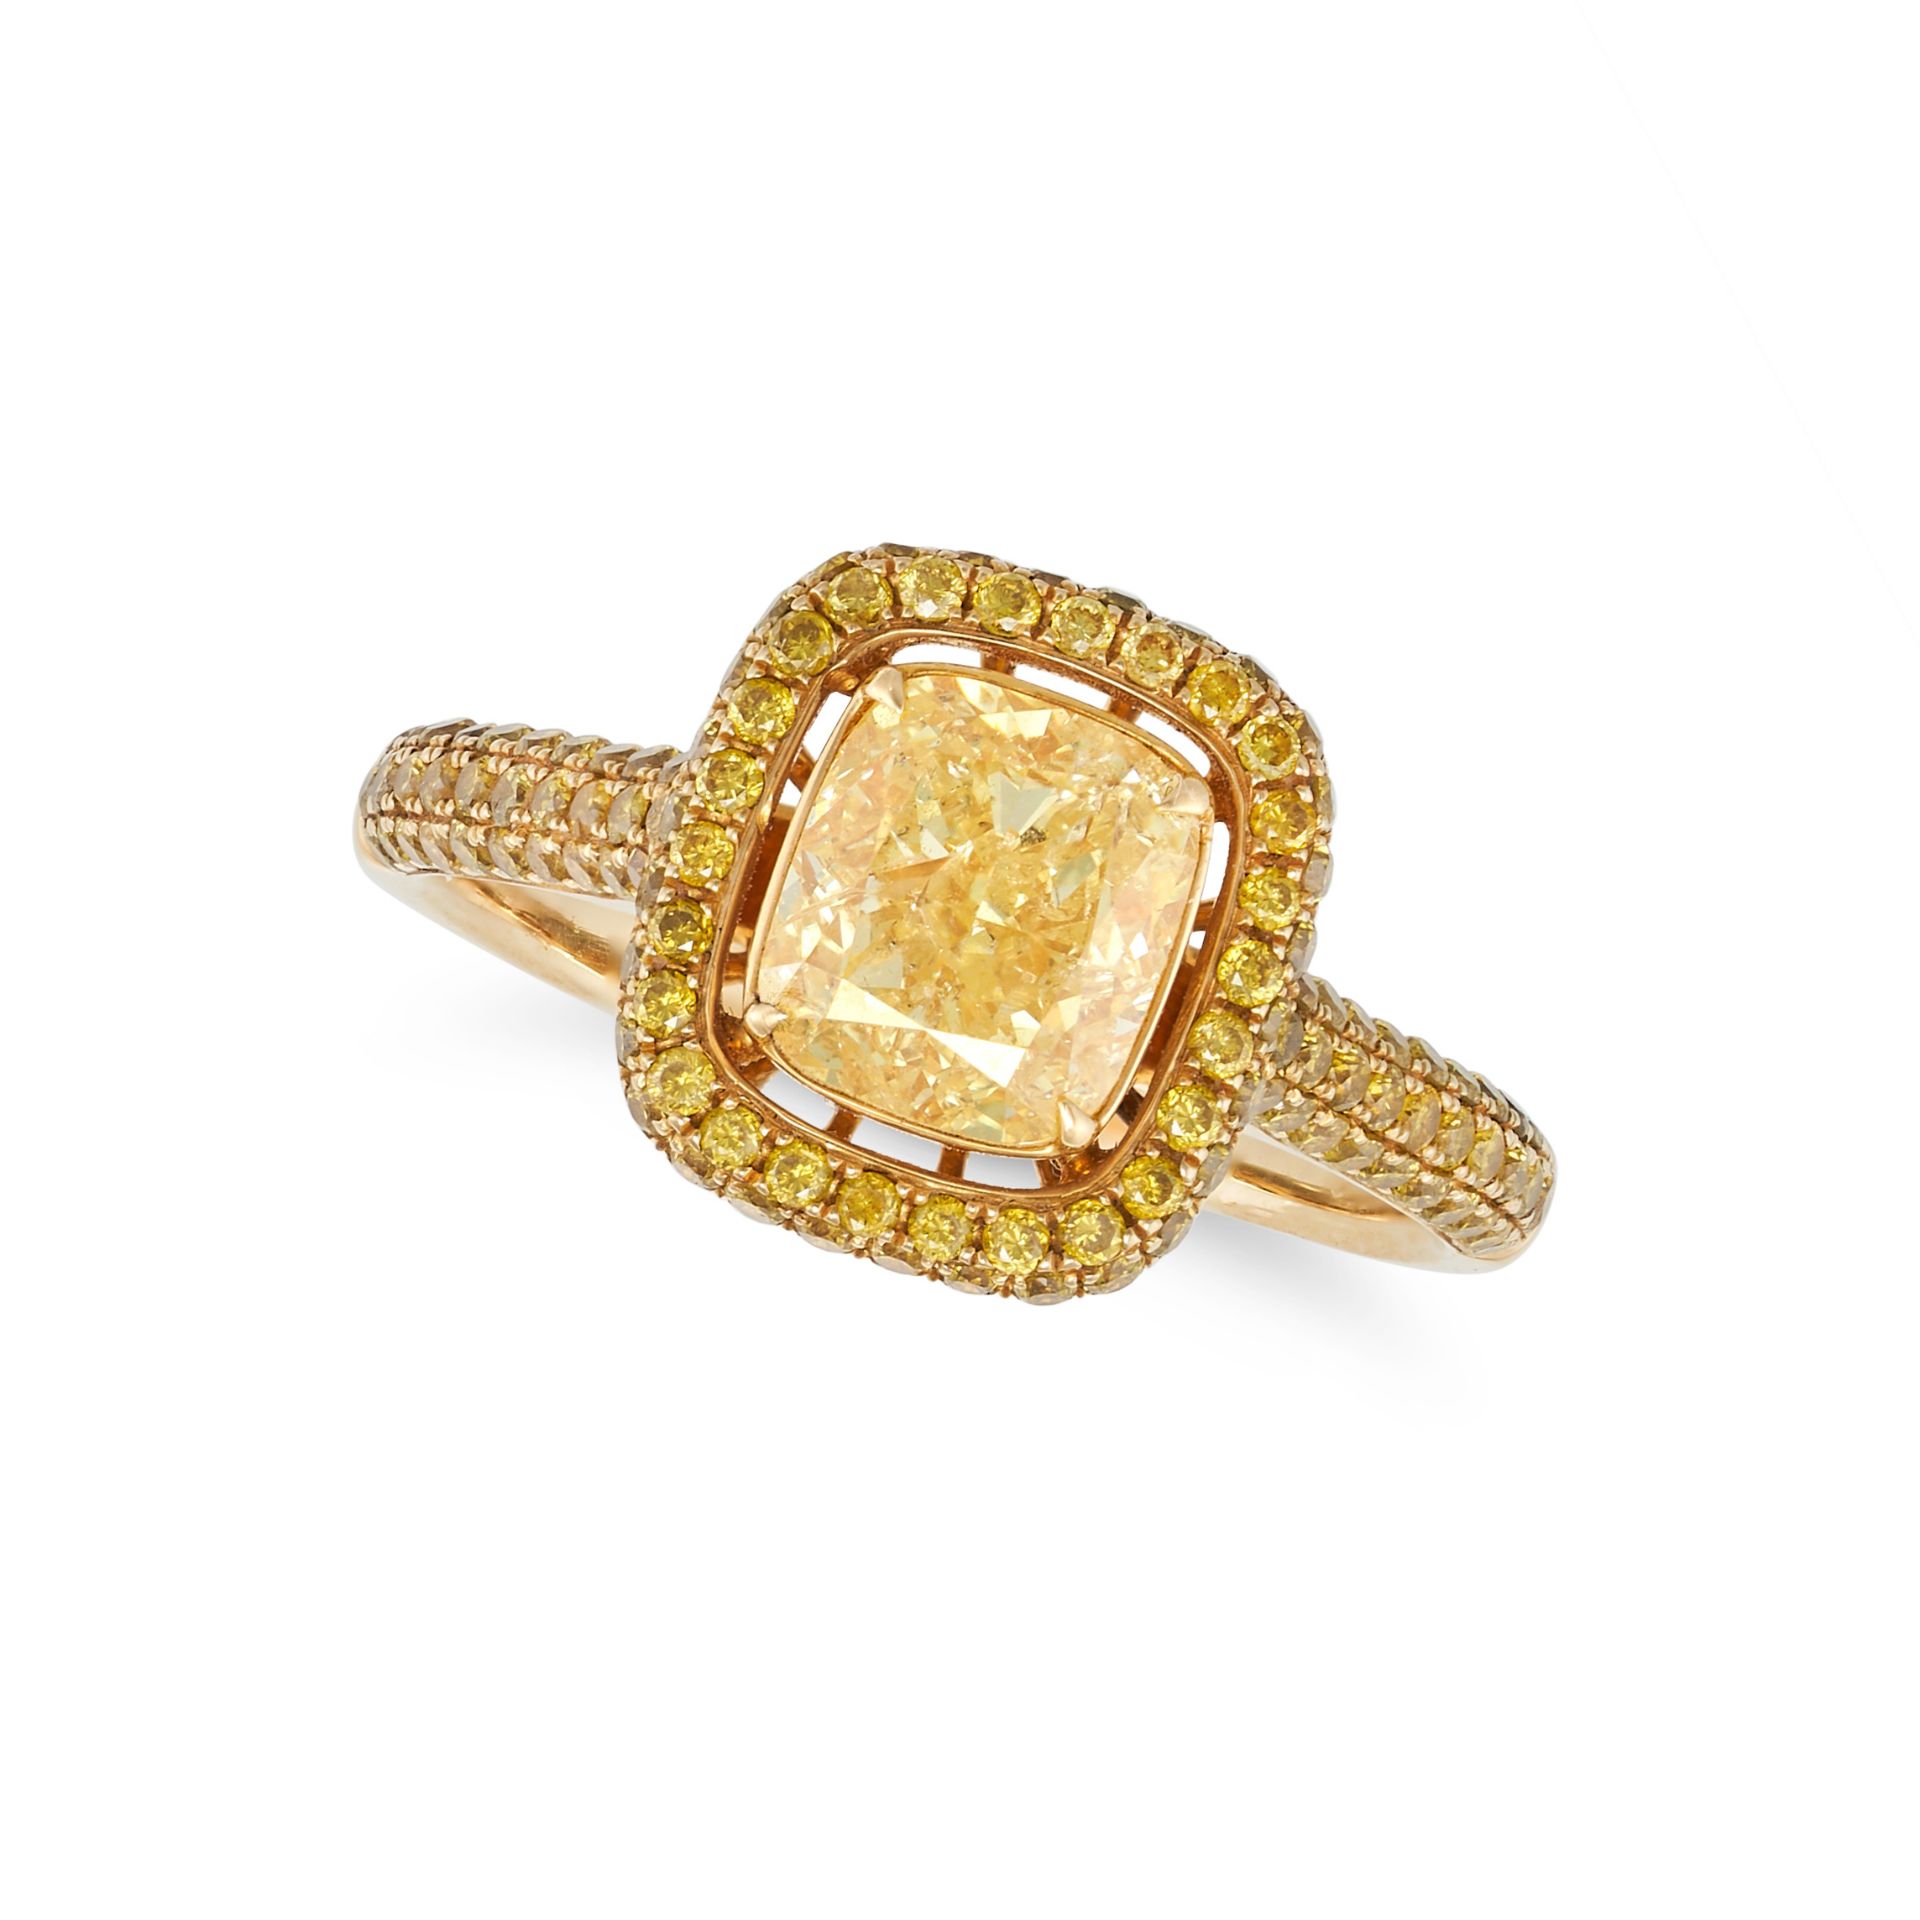 A FANCY INTENSE YELLOW DIAMOND RING in 18ct yellow gold, set with a cushion cut fancy intense yel...